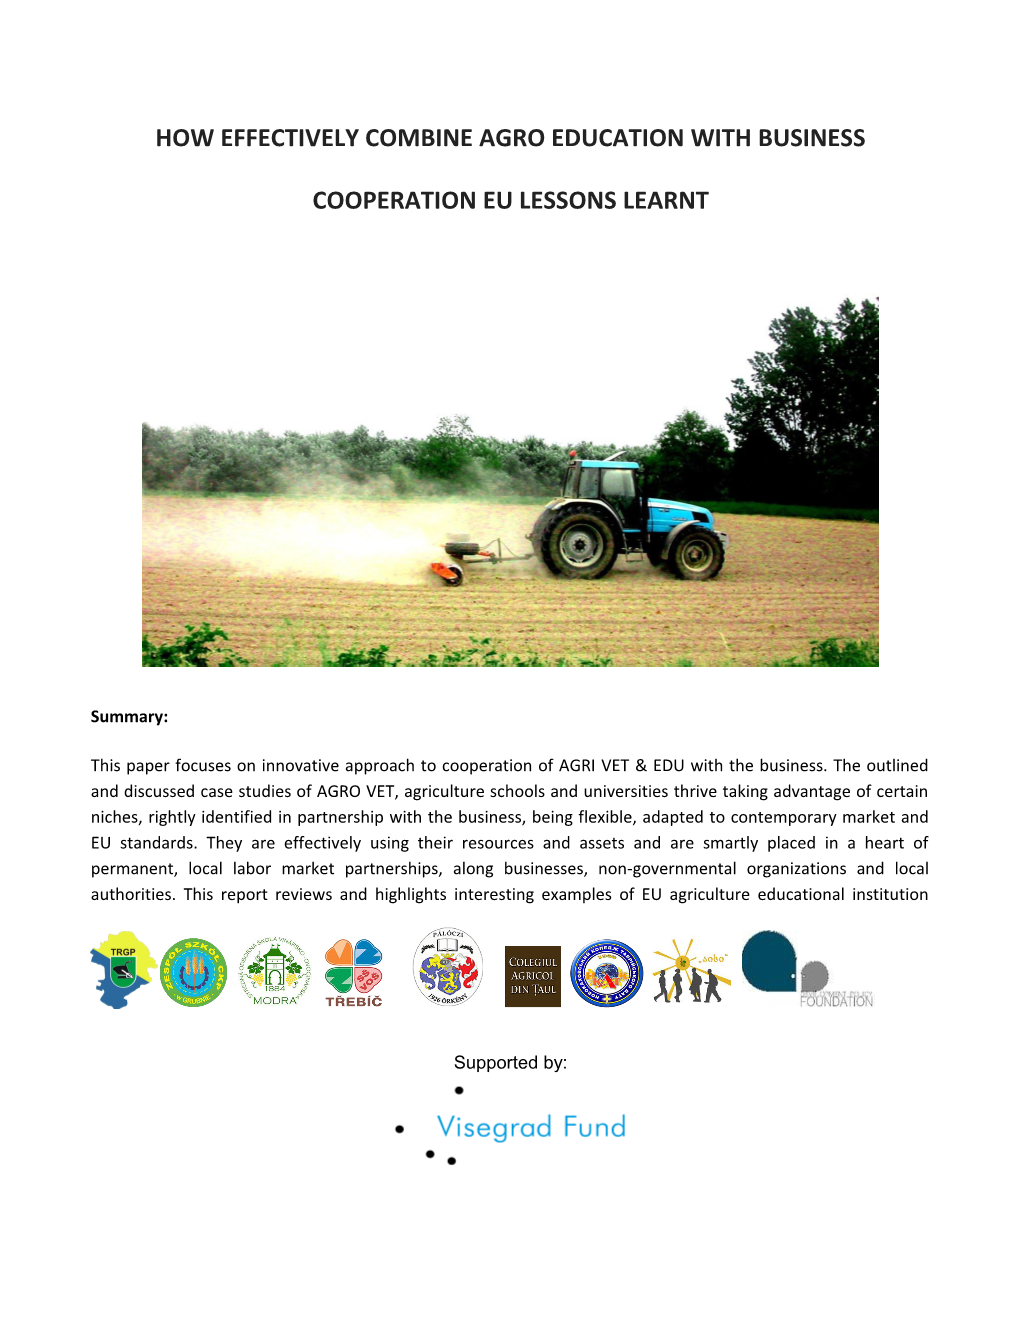 How Effectively Combine Agro Education with Business